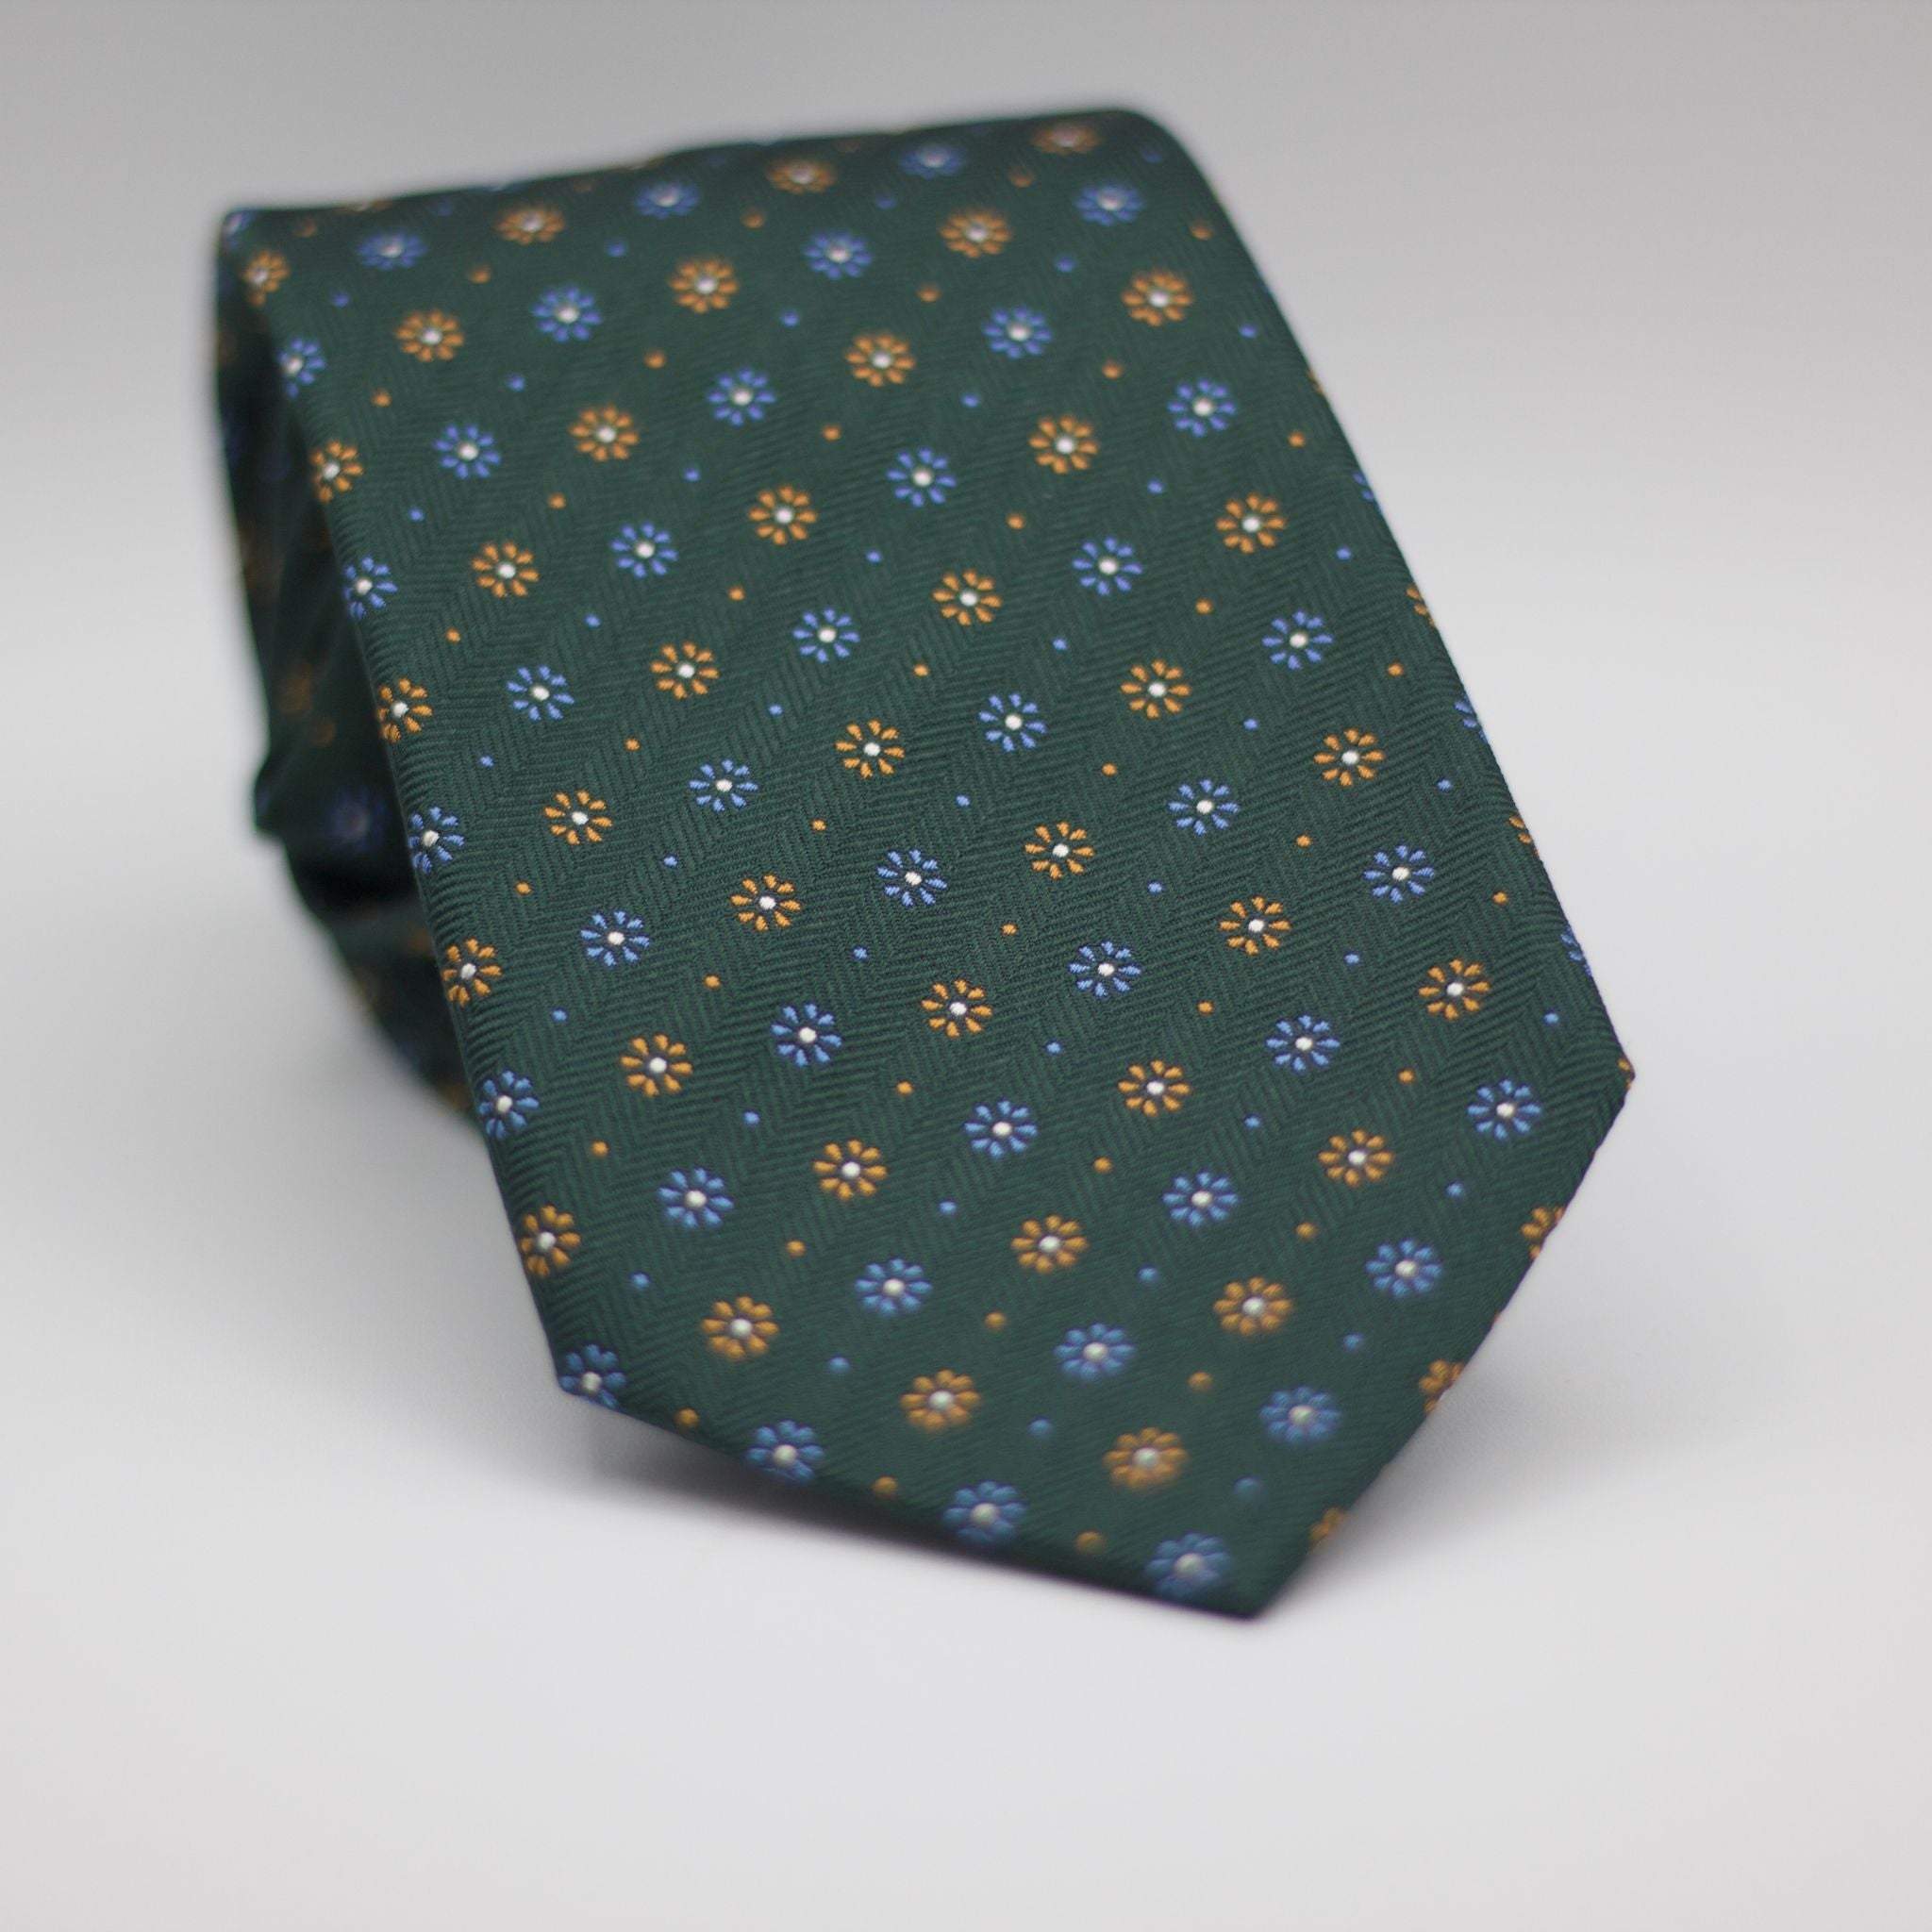 Holliday & Brown for Cruciani & Bella 100% printed Silk Self tipped Green with Ocher and Light Blue motif tie Handmade in Italy 8 cm x 150 cm #5072